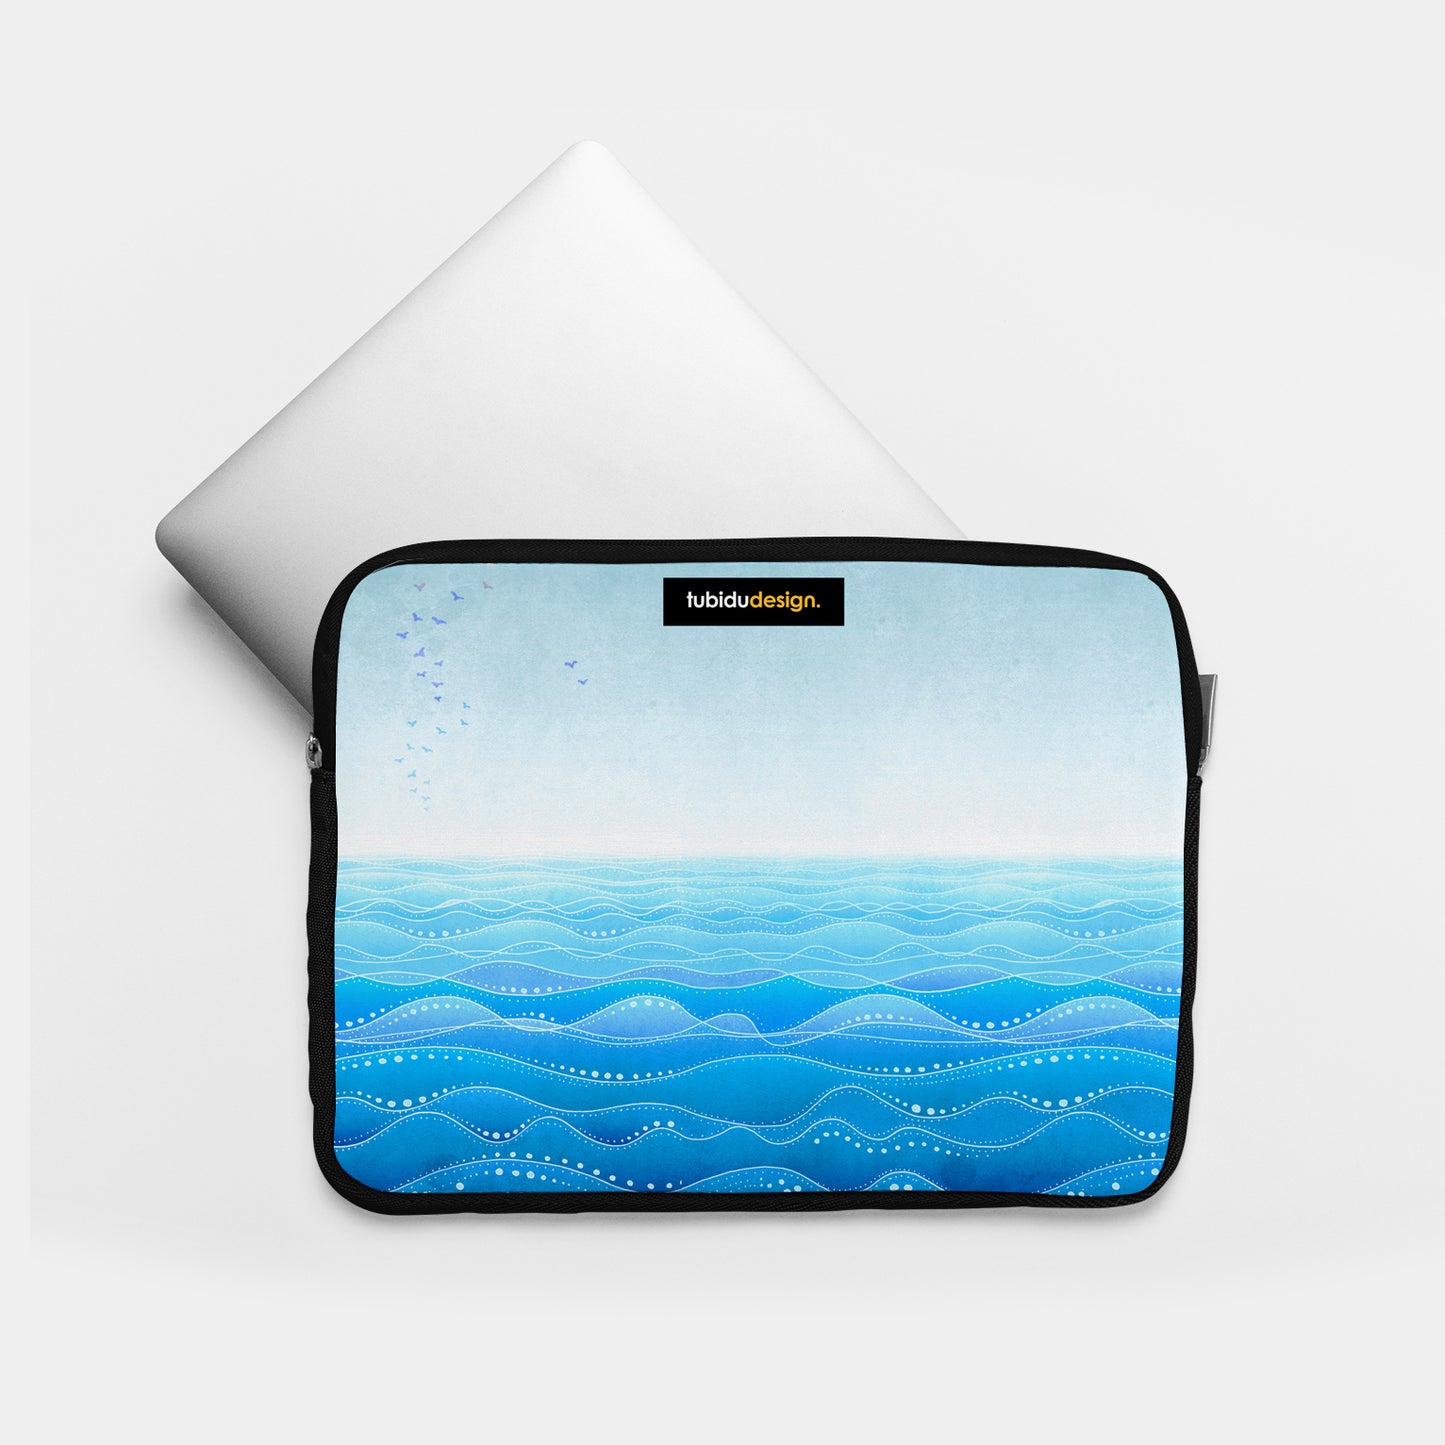 Through all ages - Illustrated Laptop Sleeve